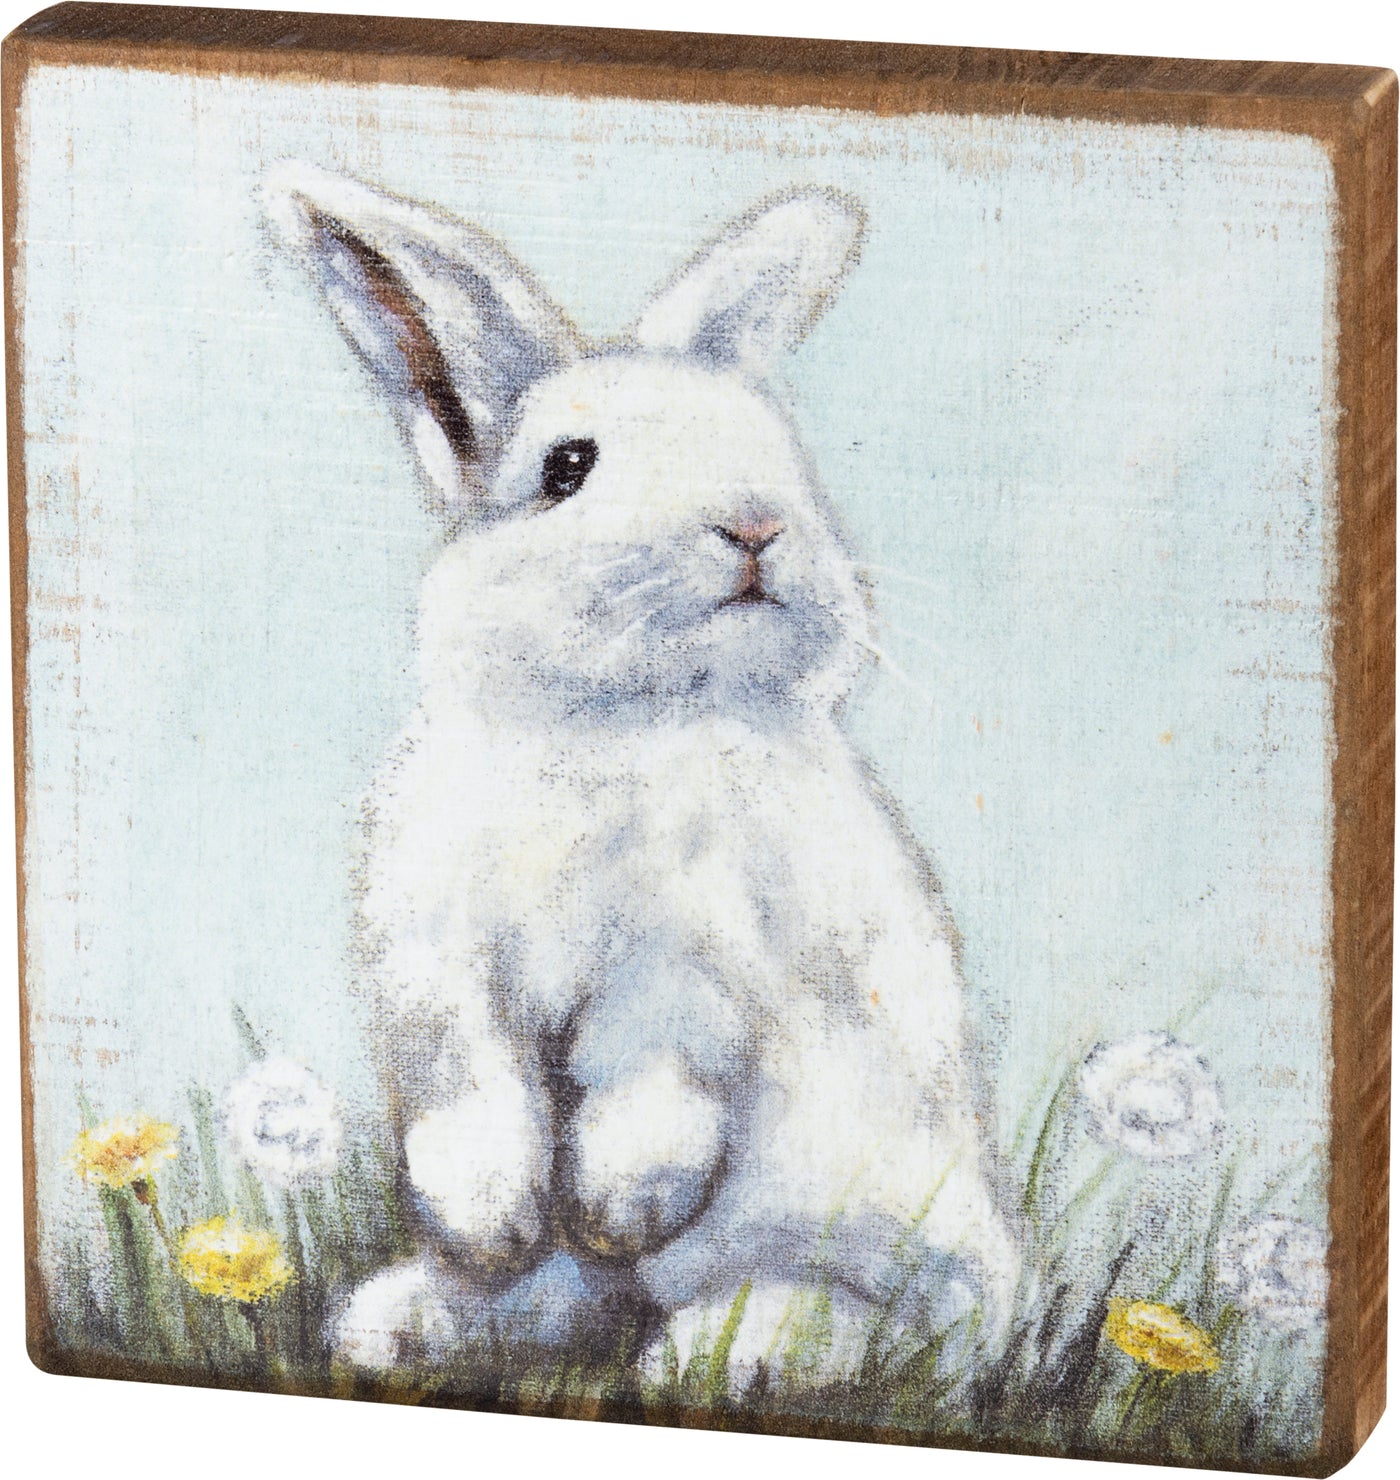 💙 White Bunny Rabbit in Flower Field Small Black Sign